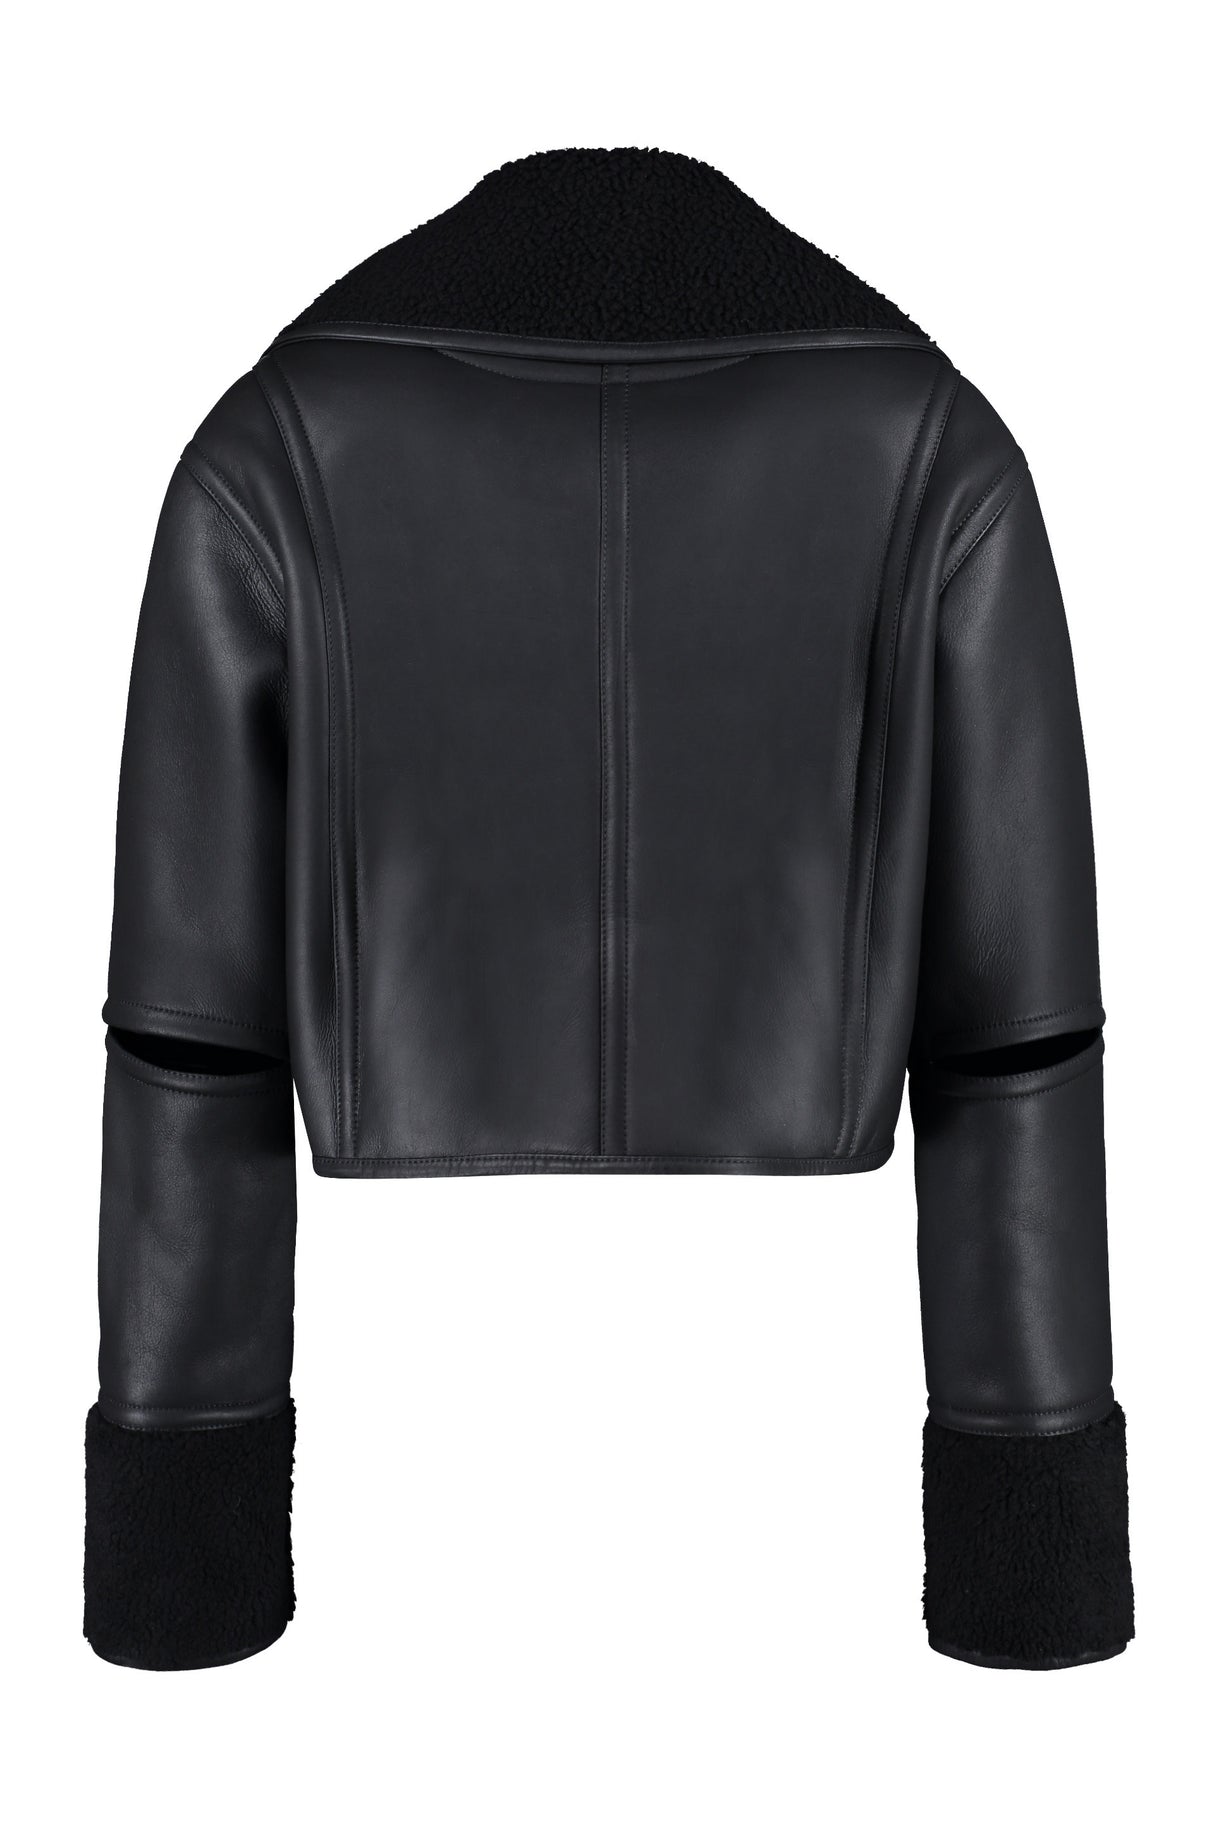 LOEWE Deconstructed Leather Jacket - Asymmetrical Shearling Collar - FW22